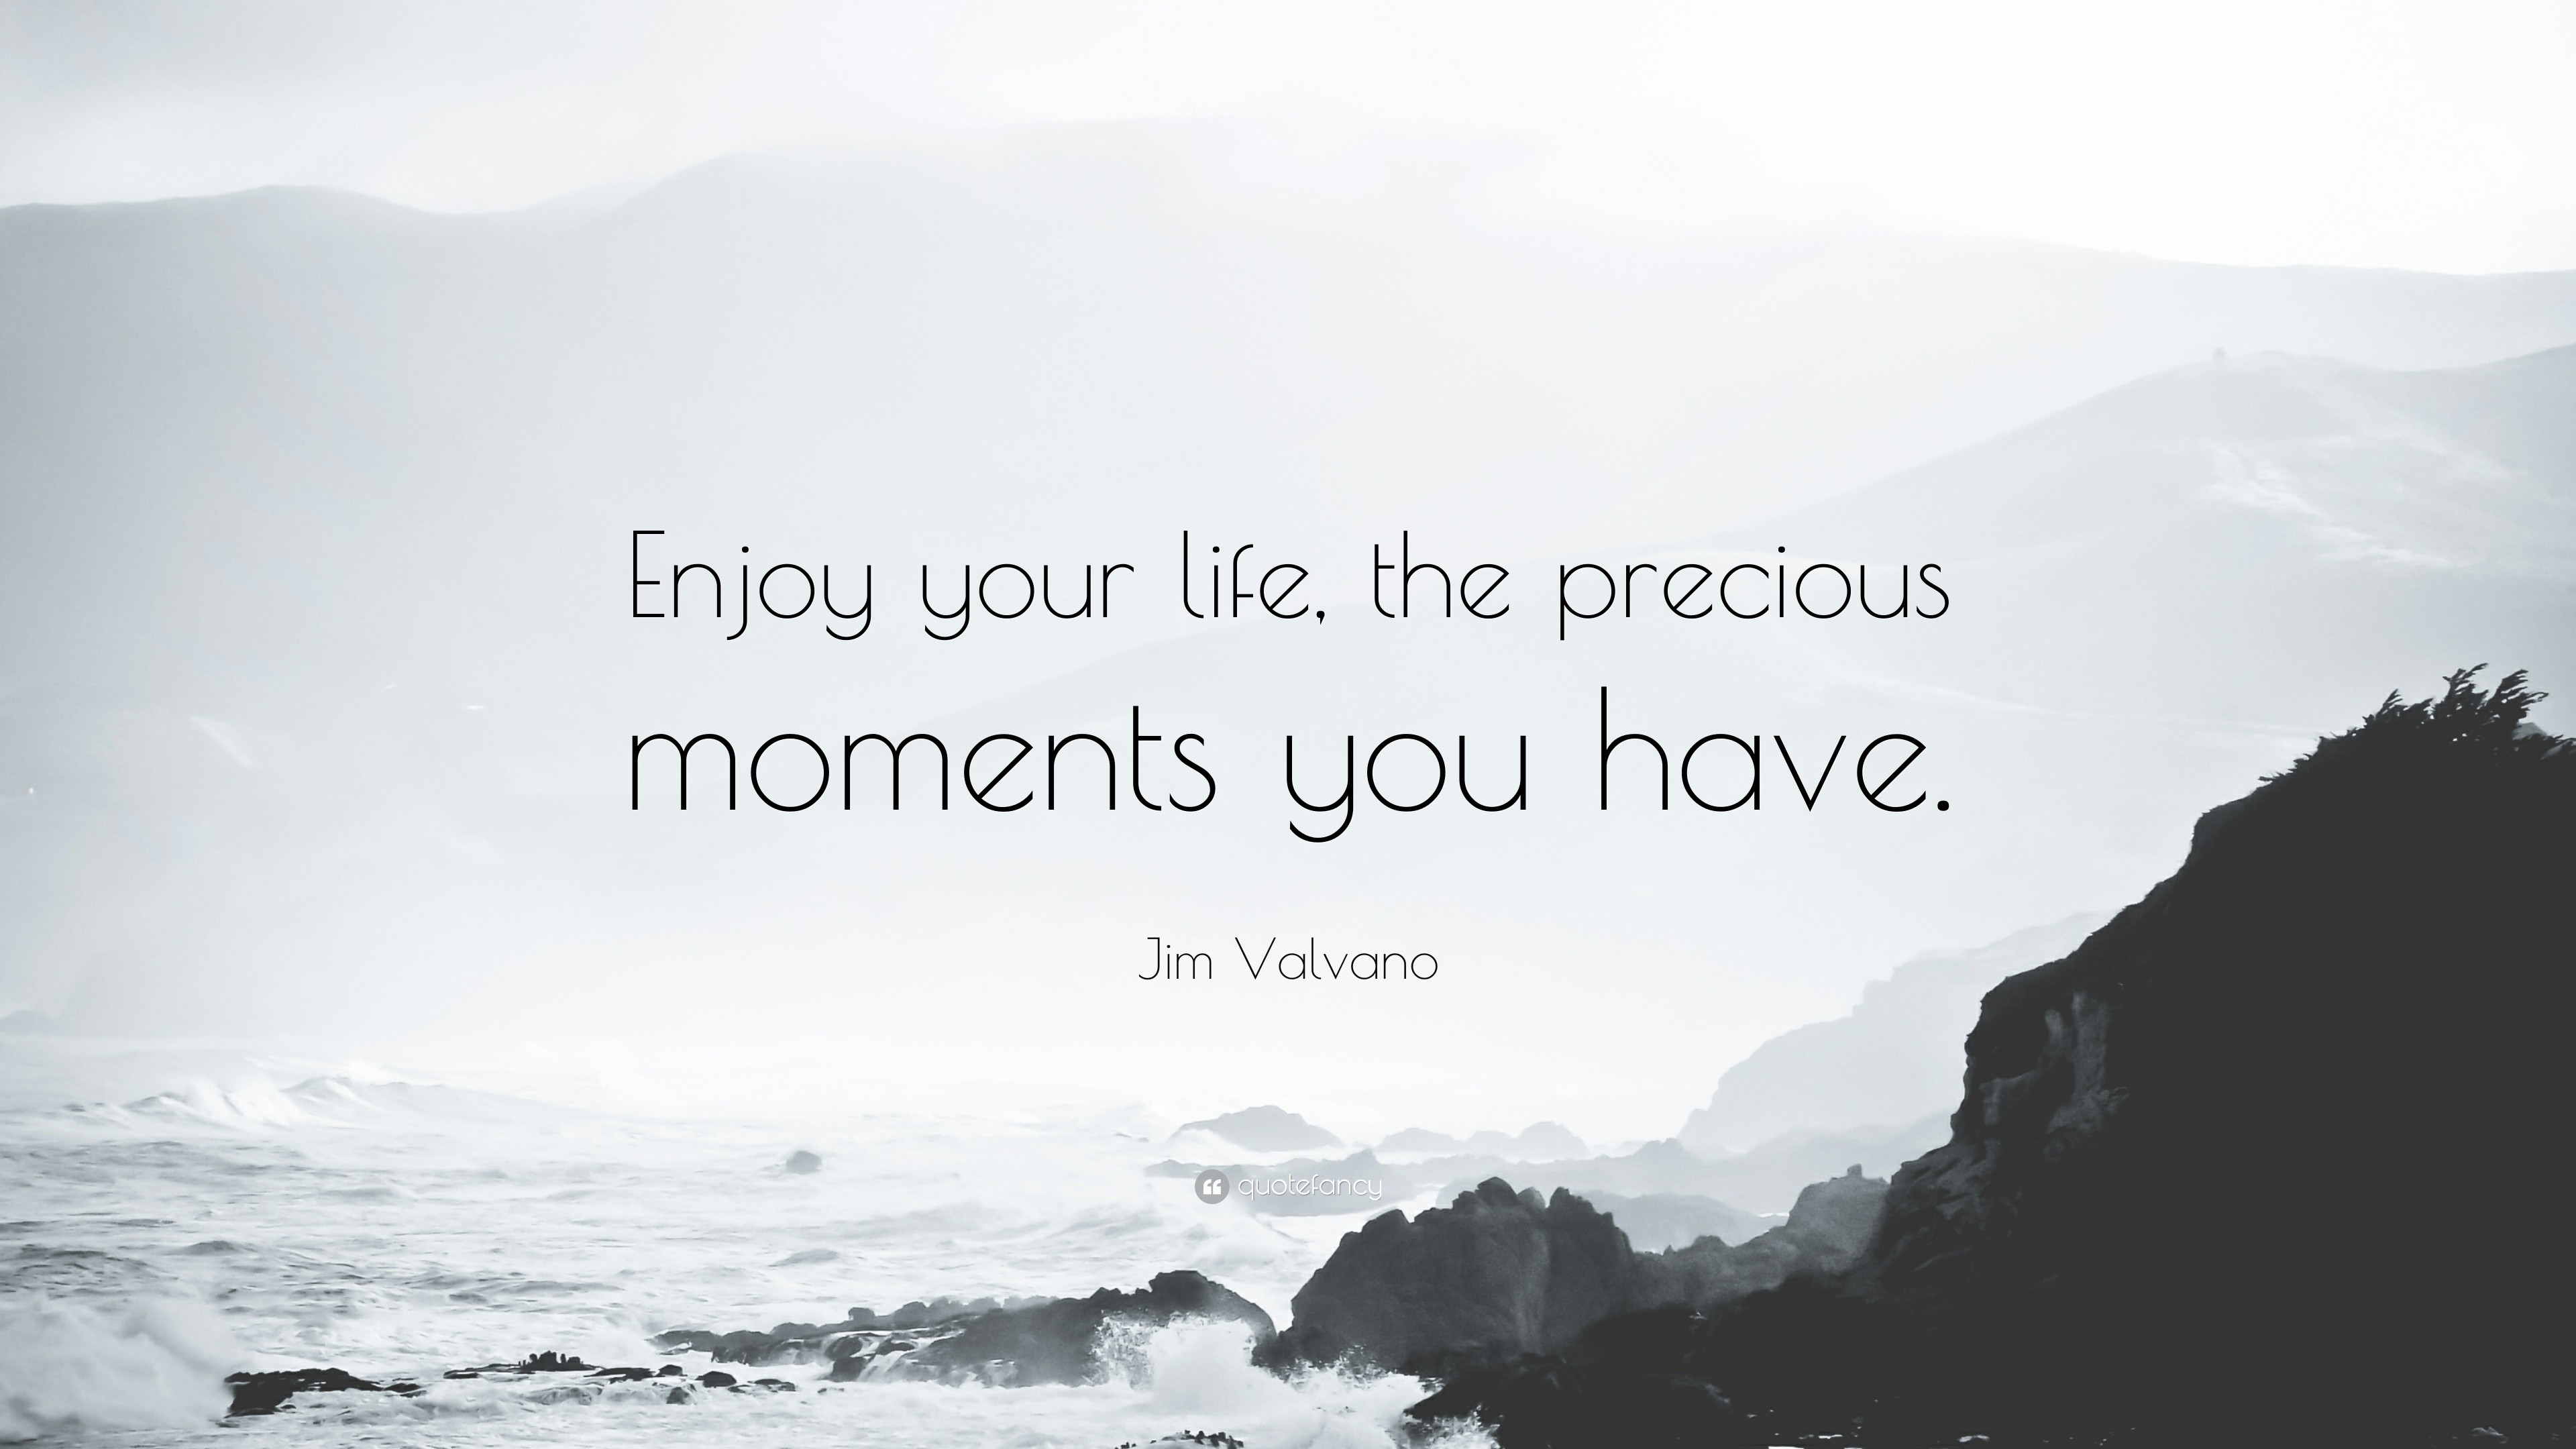 3840x2160 Jim Valvano Quote: “Enjoy your life, the precious moments you have.”